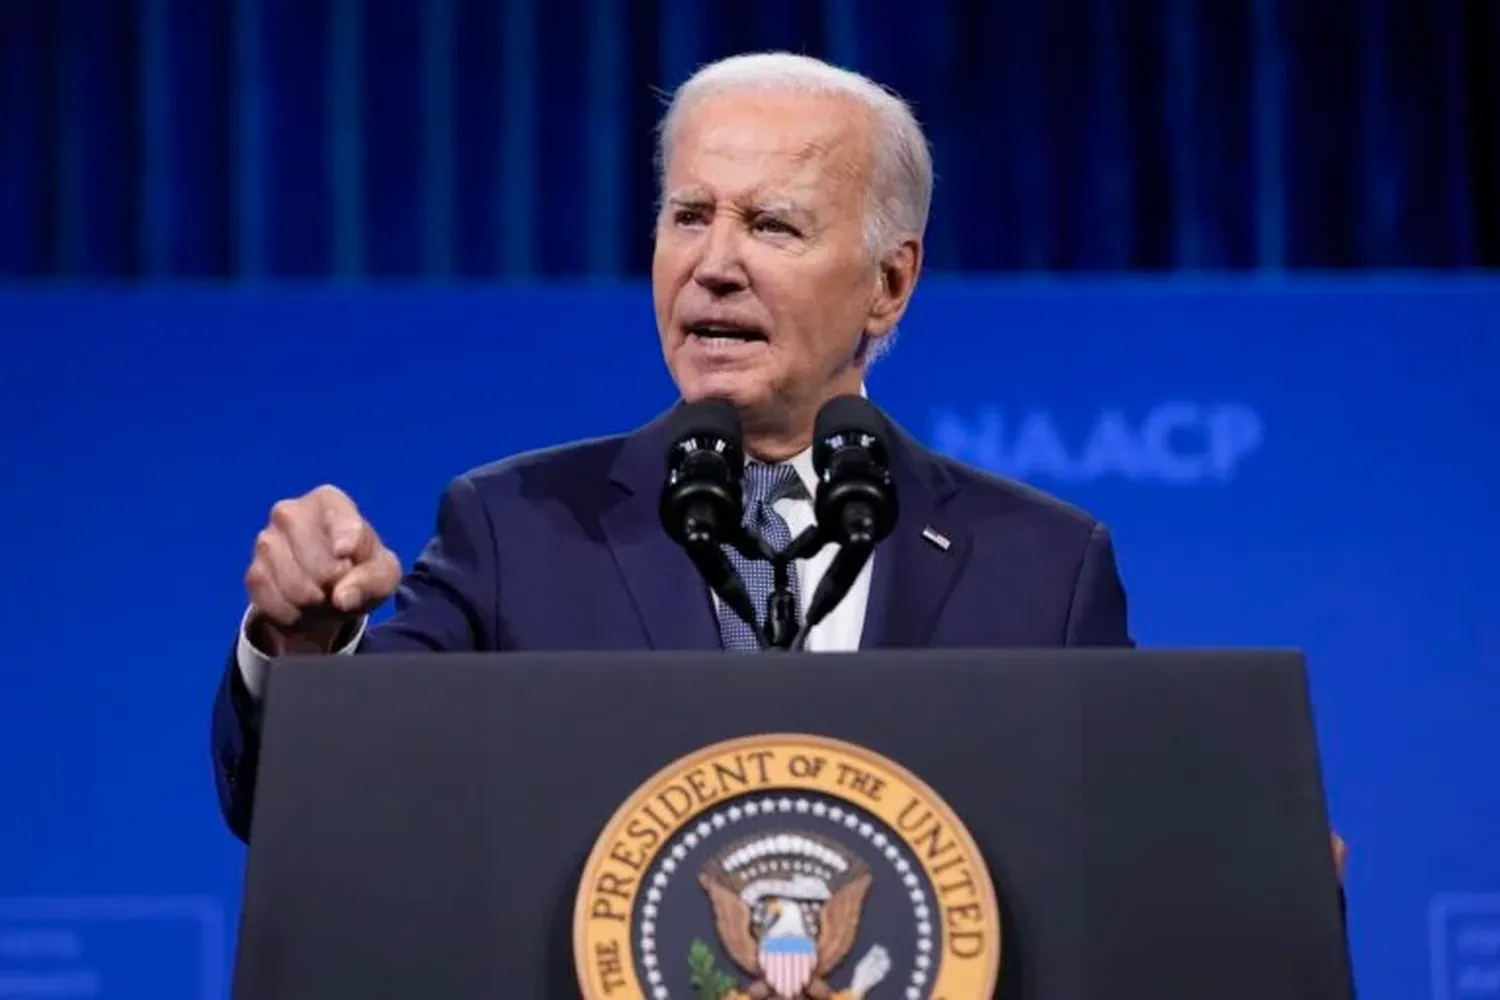 13 more Democrats call for Biden to exit 2024 election